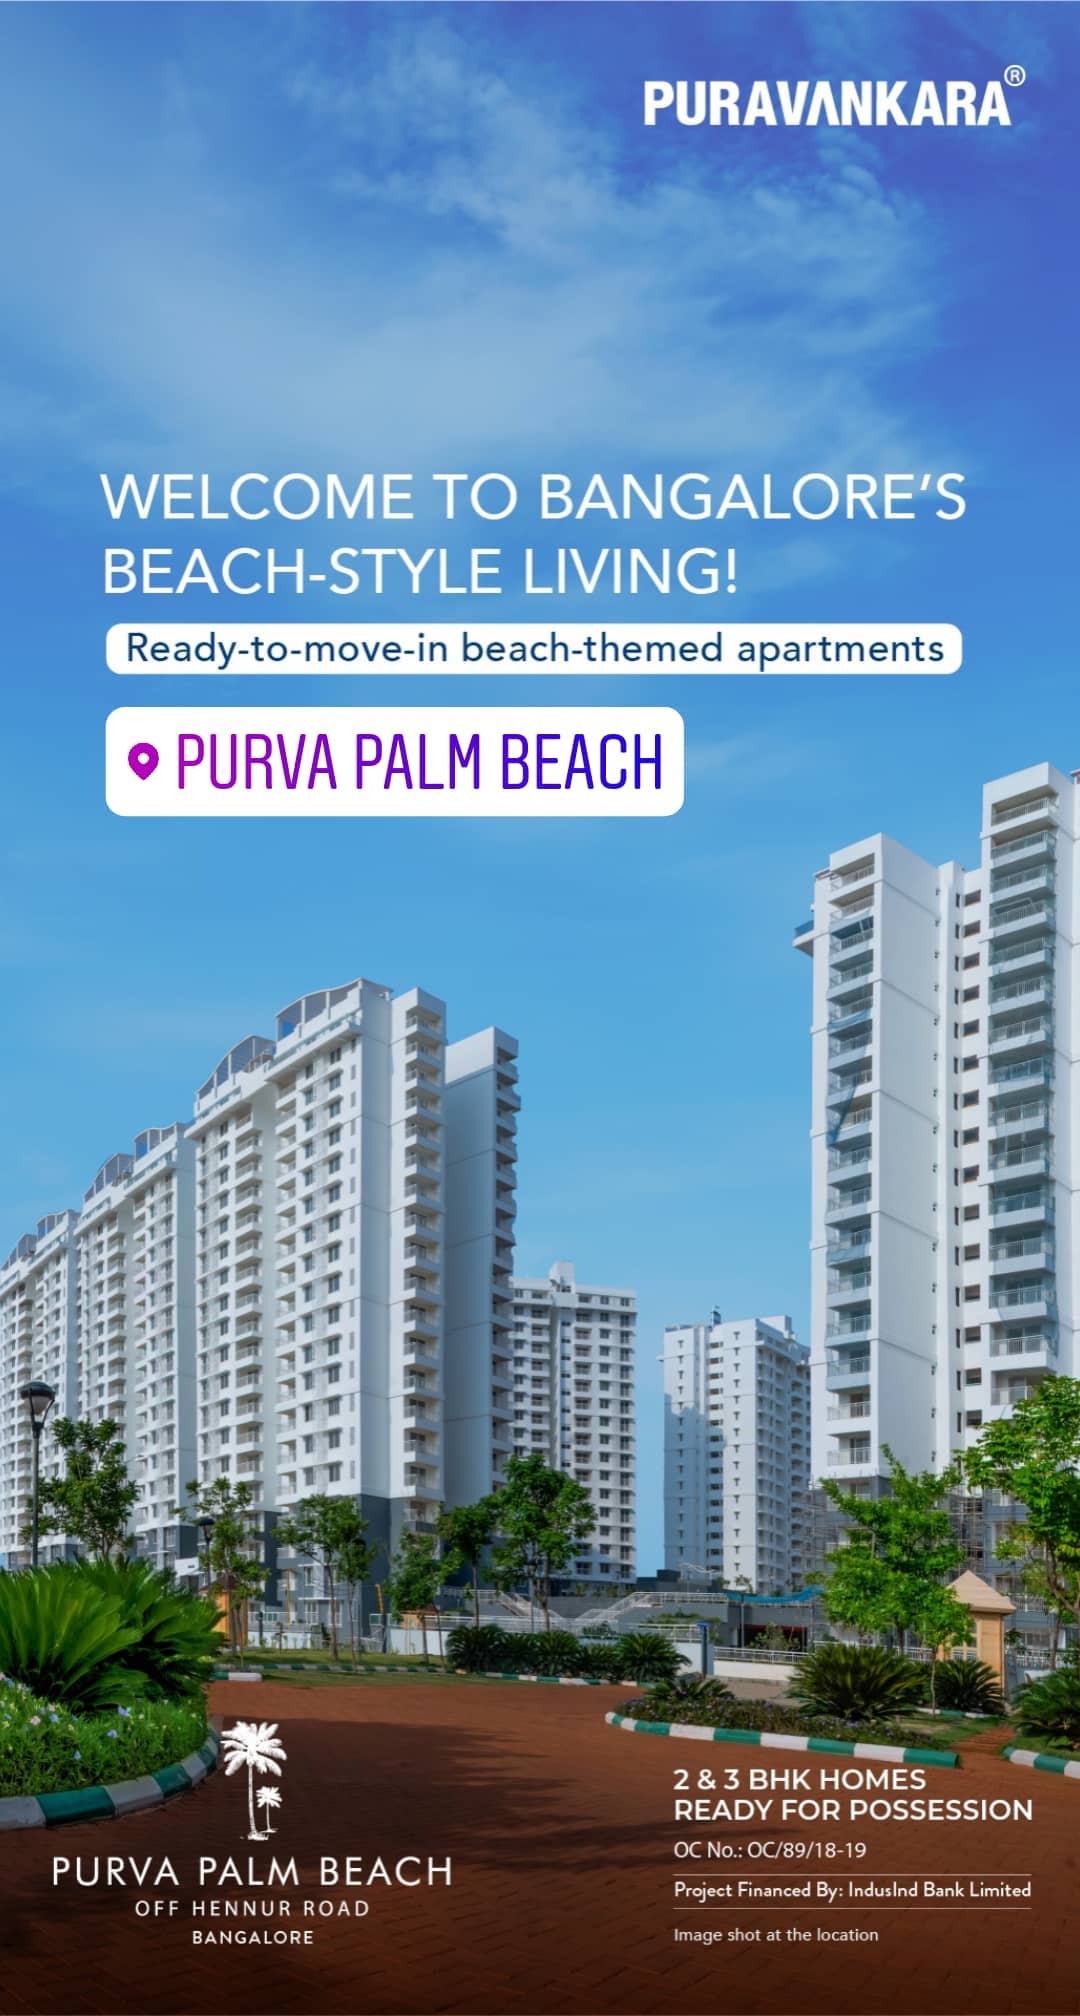 Ready to move in beach themed apartments at Purva Palm Beach, Bangalore Update